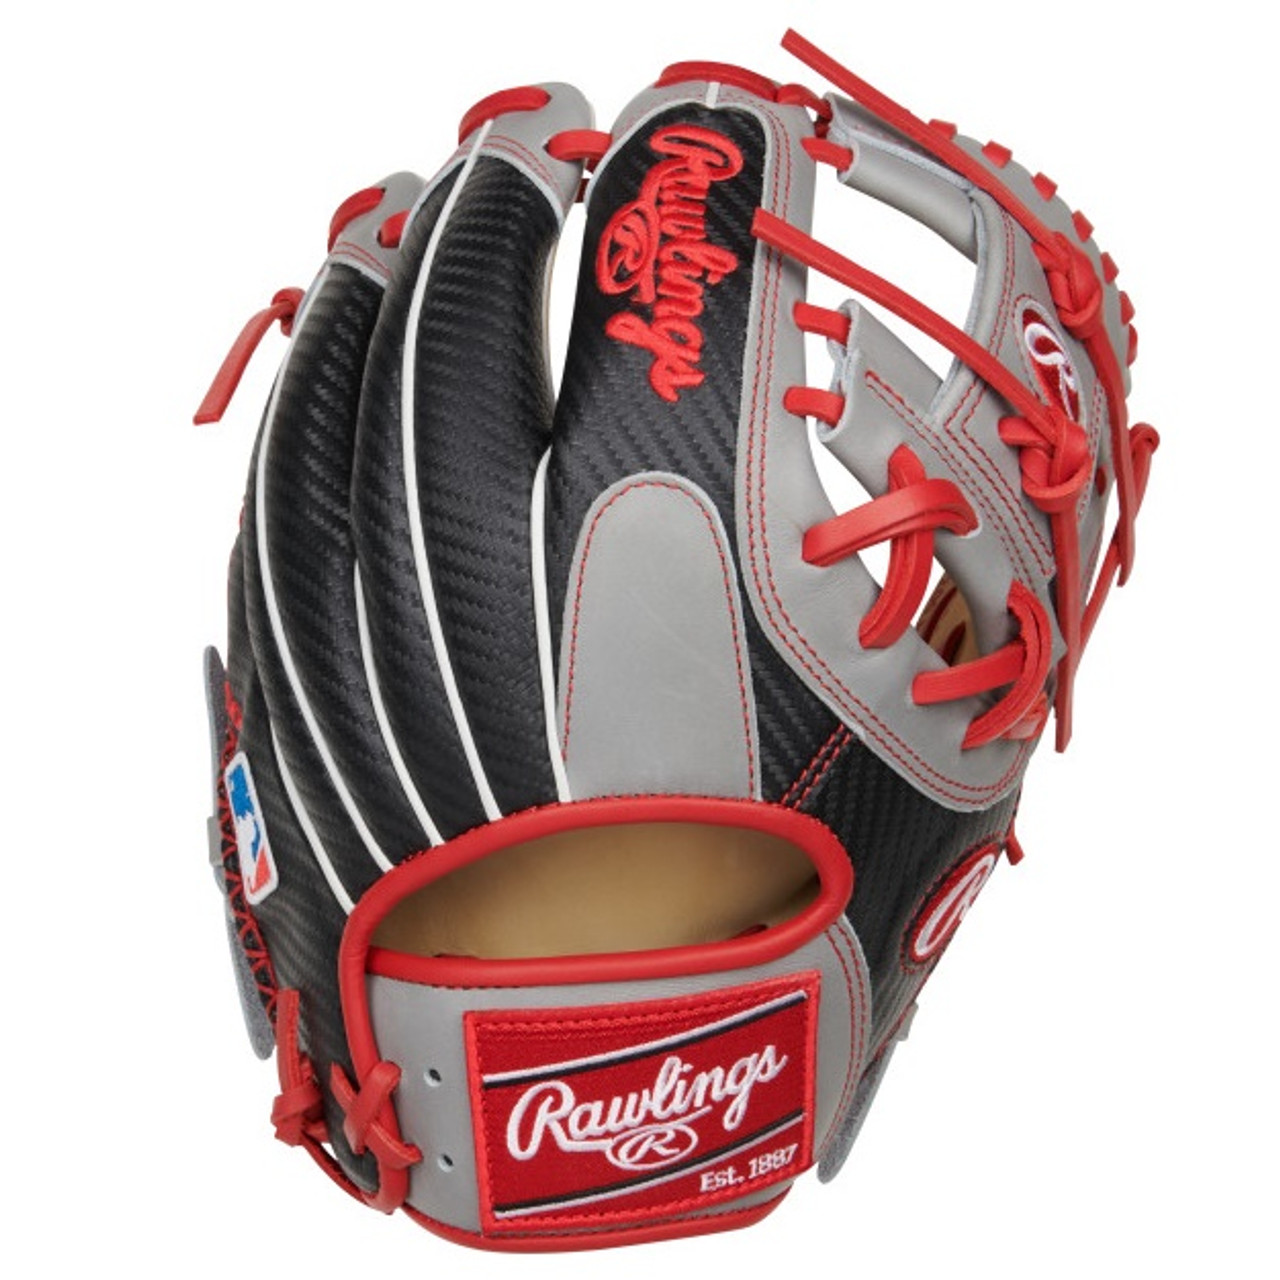 2021 RAWLINGS HEART OF THE HIDE 34-INCH CATCHER'S MITT